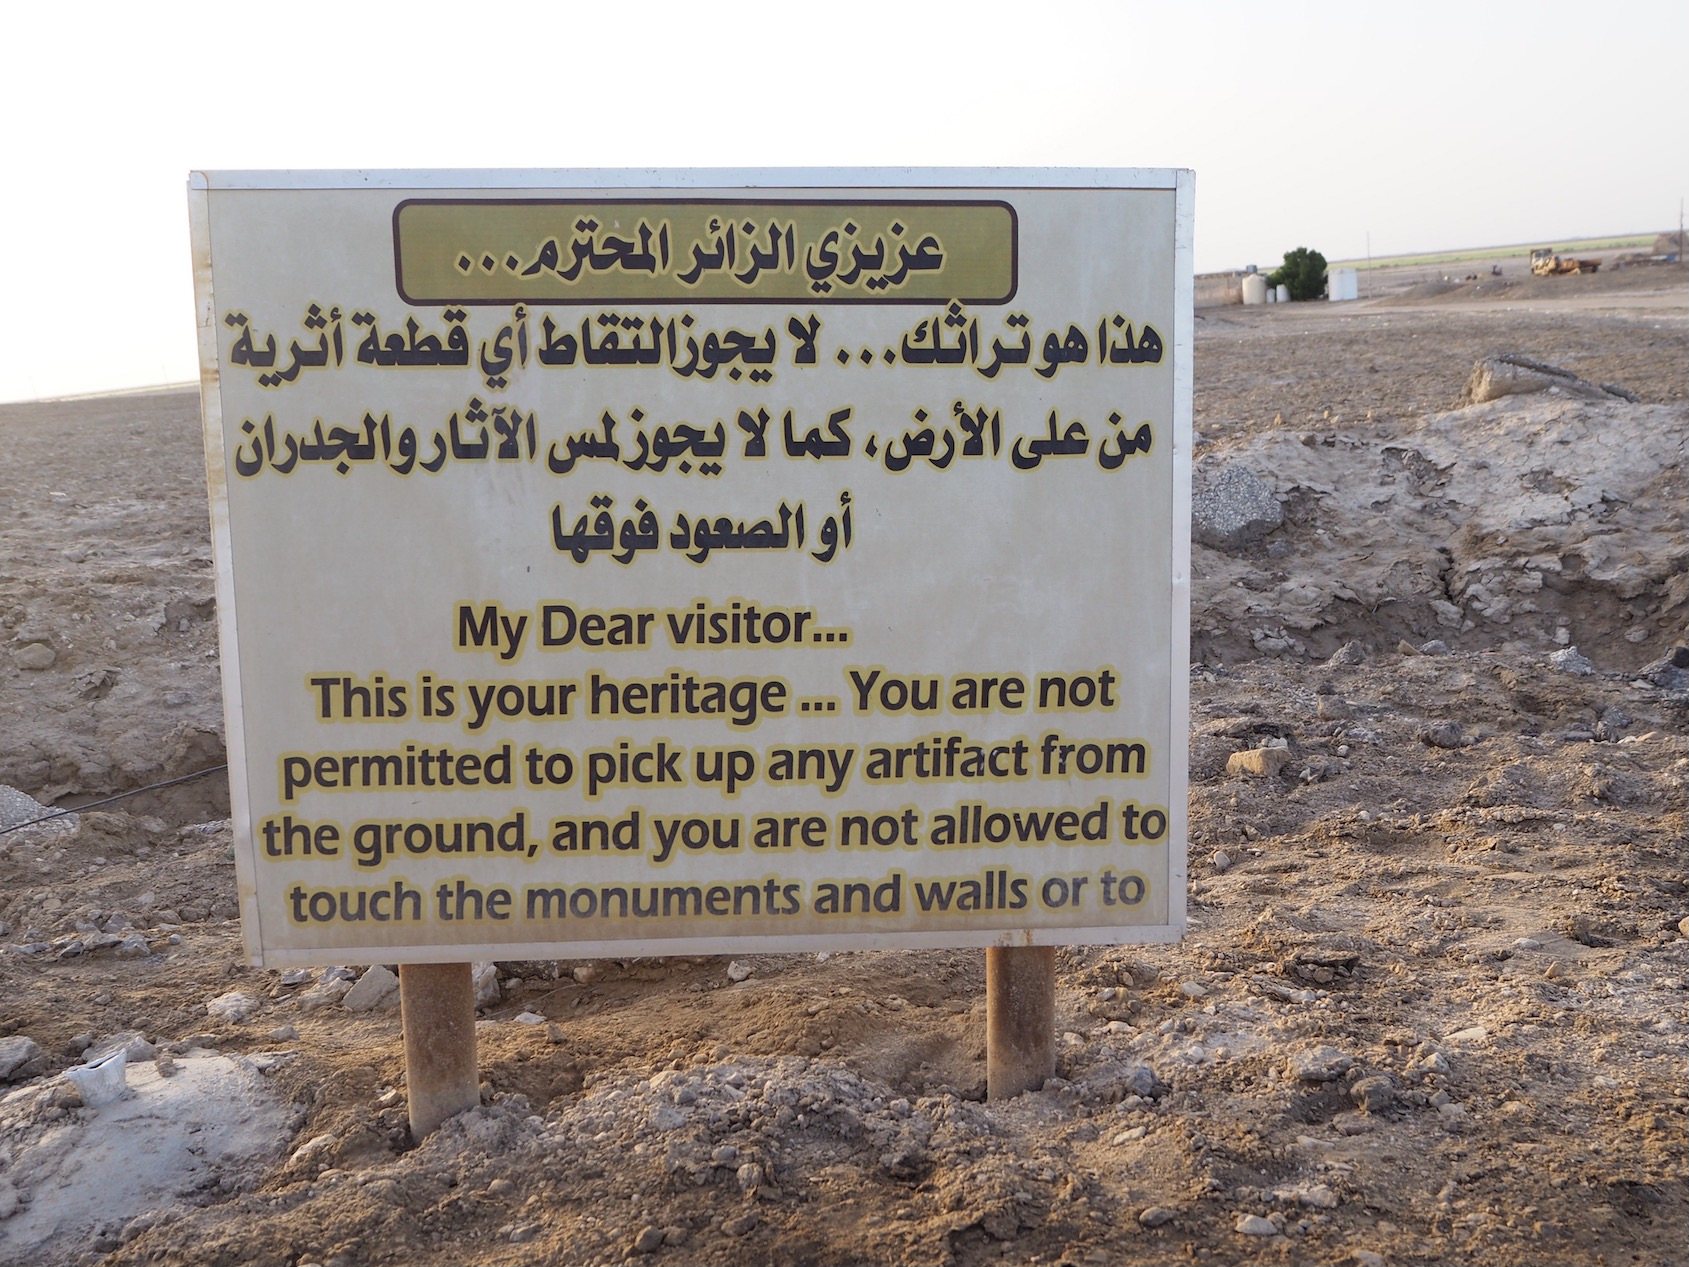 A warning sign for visitors at Ur, a popular, open site for Iraqi and foreign visitors 